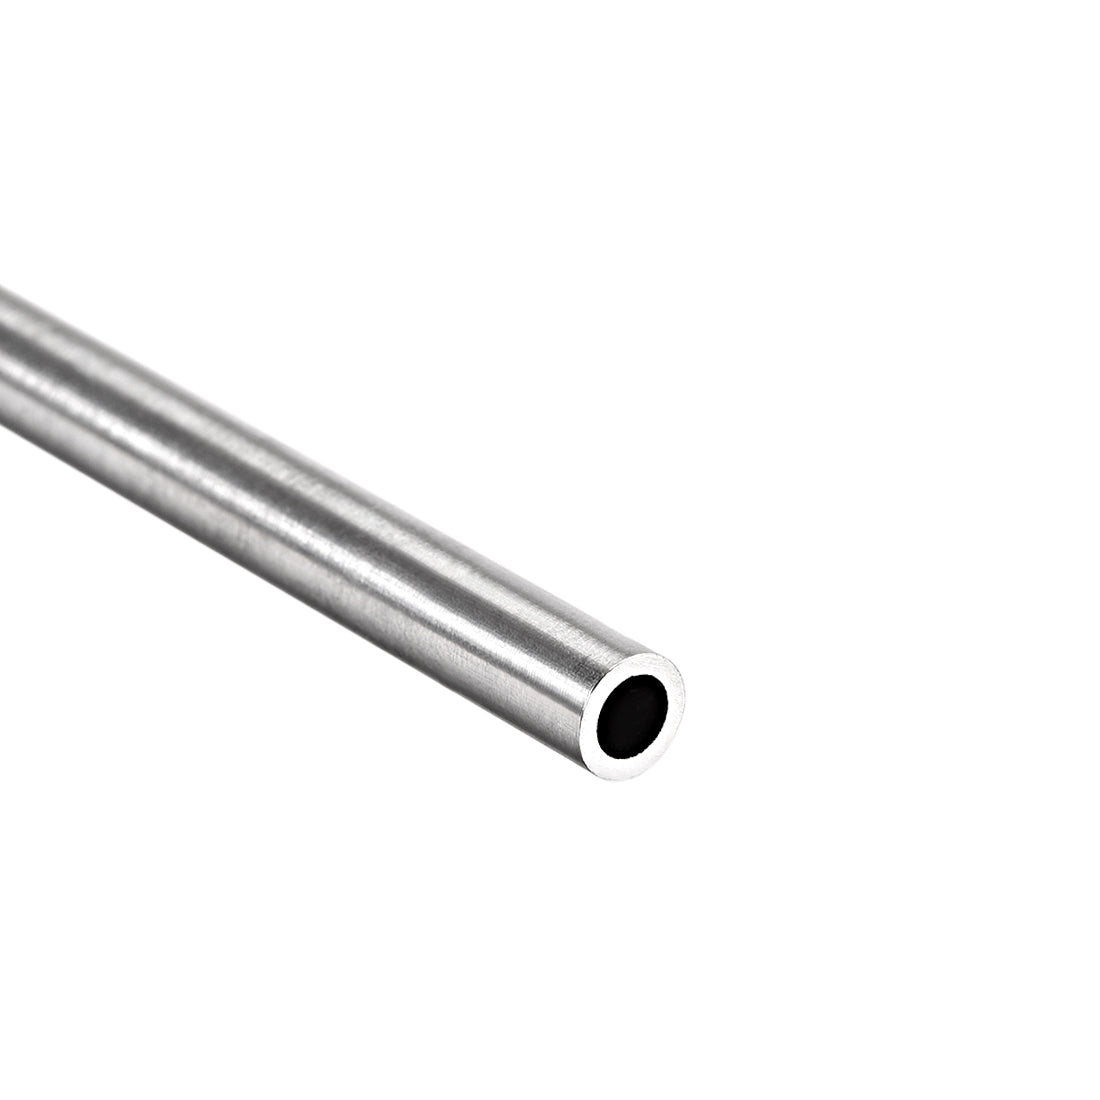 uxcell Uxcell 304 Stainless Steel Round Tubing 6mm OD 1mm Wall Thickness 250mm Length Seamless Straight Pipe Tube 2 Pcs